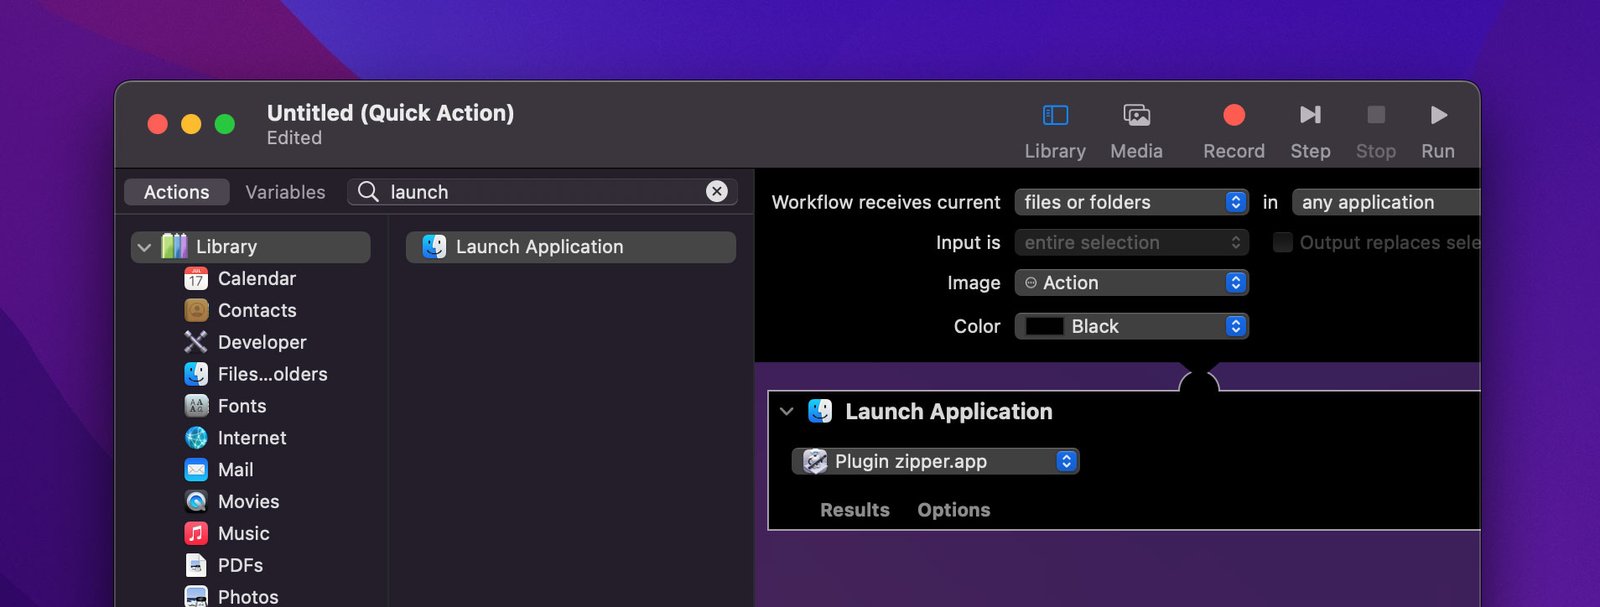 Custom application added to Quick Action workflow